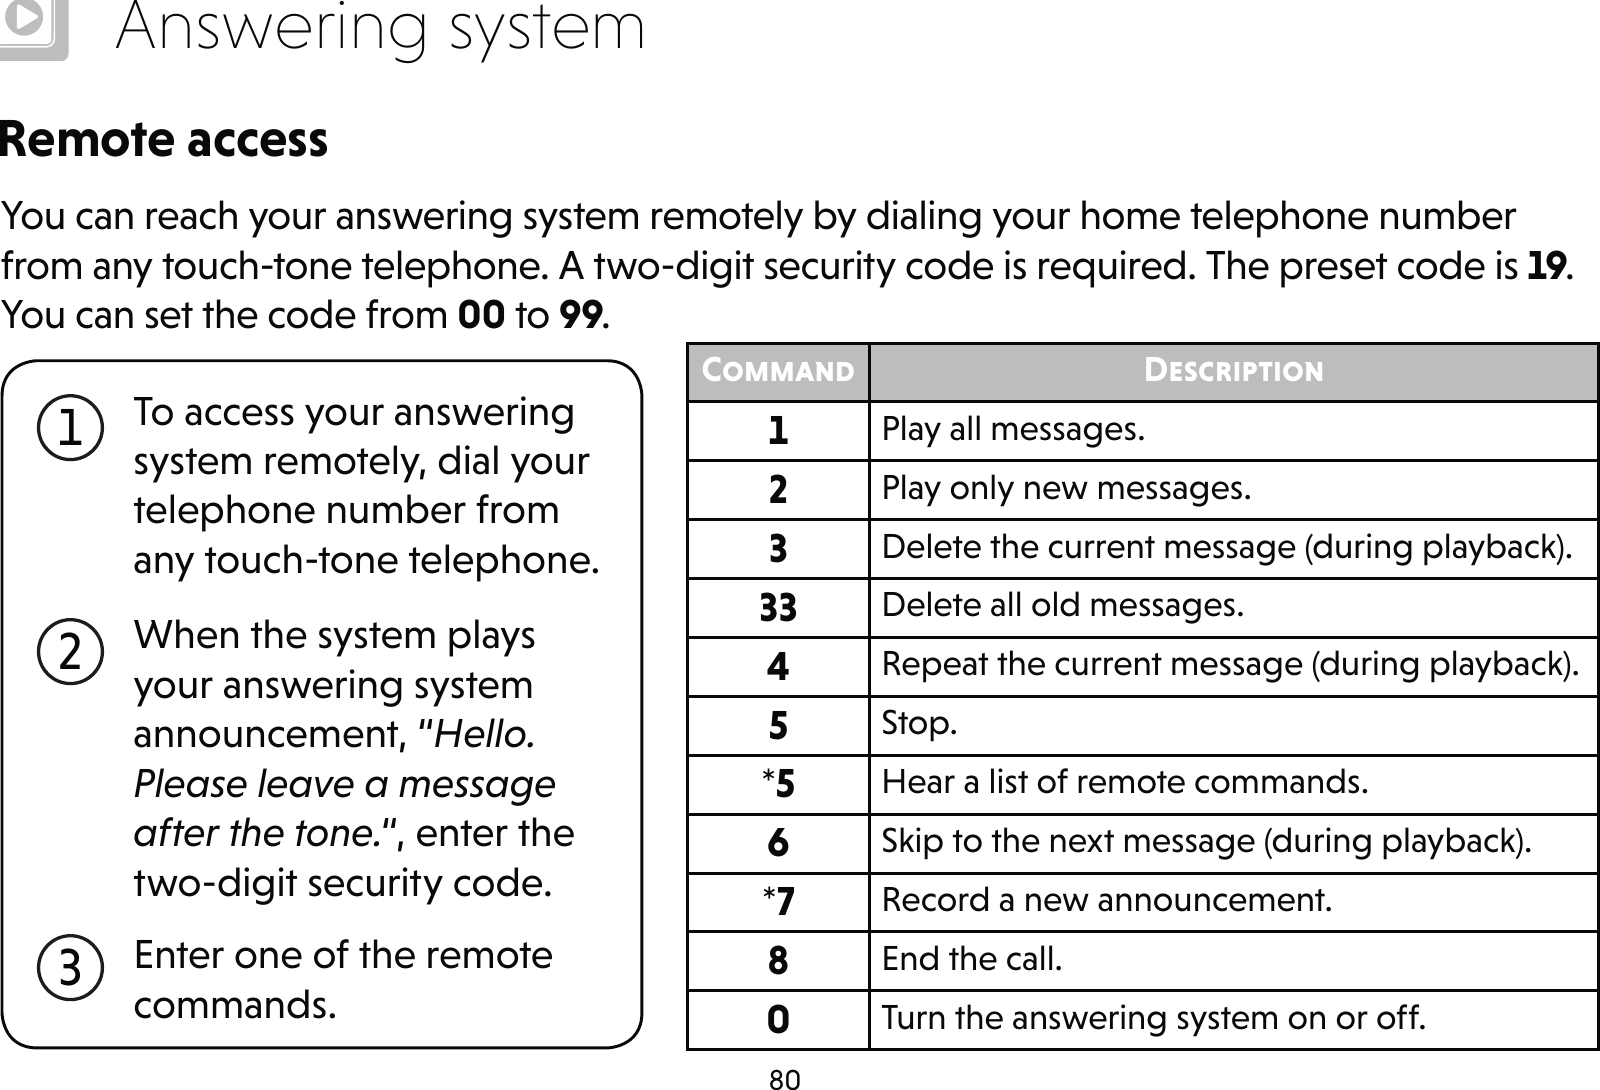 80Answering systemRemote accessYou can reach your answering system remotely by dialing your home telephone number from any touch-tone telephone. A two-digit security code is required. The preset code is 19. You can set the code from 00 to 99.To access your answering system remotely, dial your telephone number from any touch-tone telephone.1When the system plays your answering system announcement, “Hello. Please leave a message after the tone.“, enter the two-digit security code.2Enter one of the remote commands.3Command Description1Play all messages.2Play only new messages.3Delete the current message (during playback).33 Delete all old messages.4Repeat the current message (during playback).5Stop.*5 Hear a list of remote commands.6Skip to the next message (during playback).*7 Record a new announcement.8End the call.0Turn the answering system on or off.